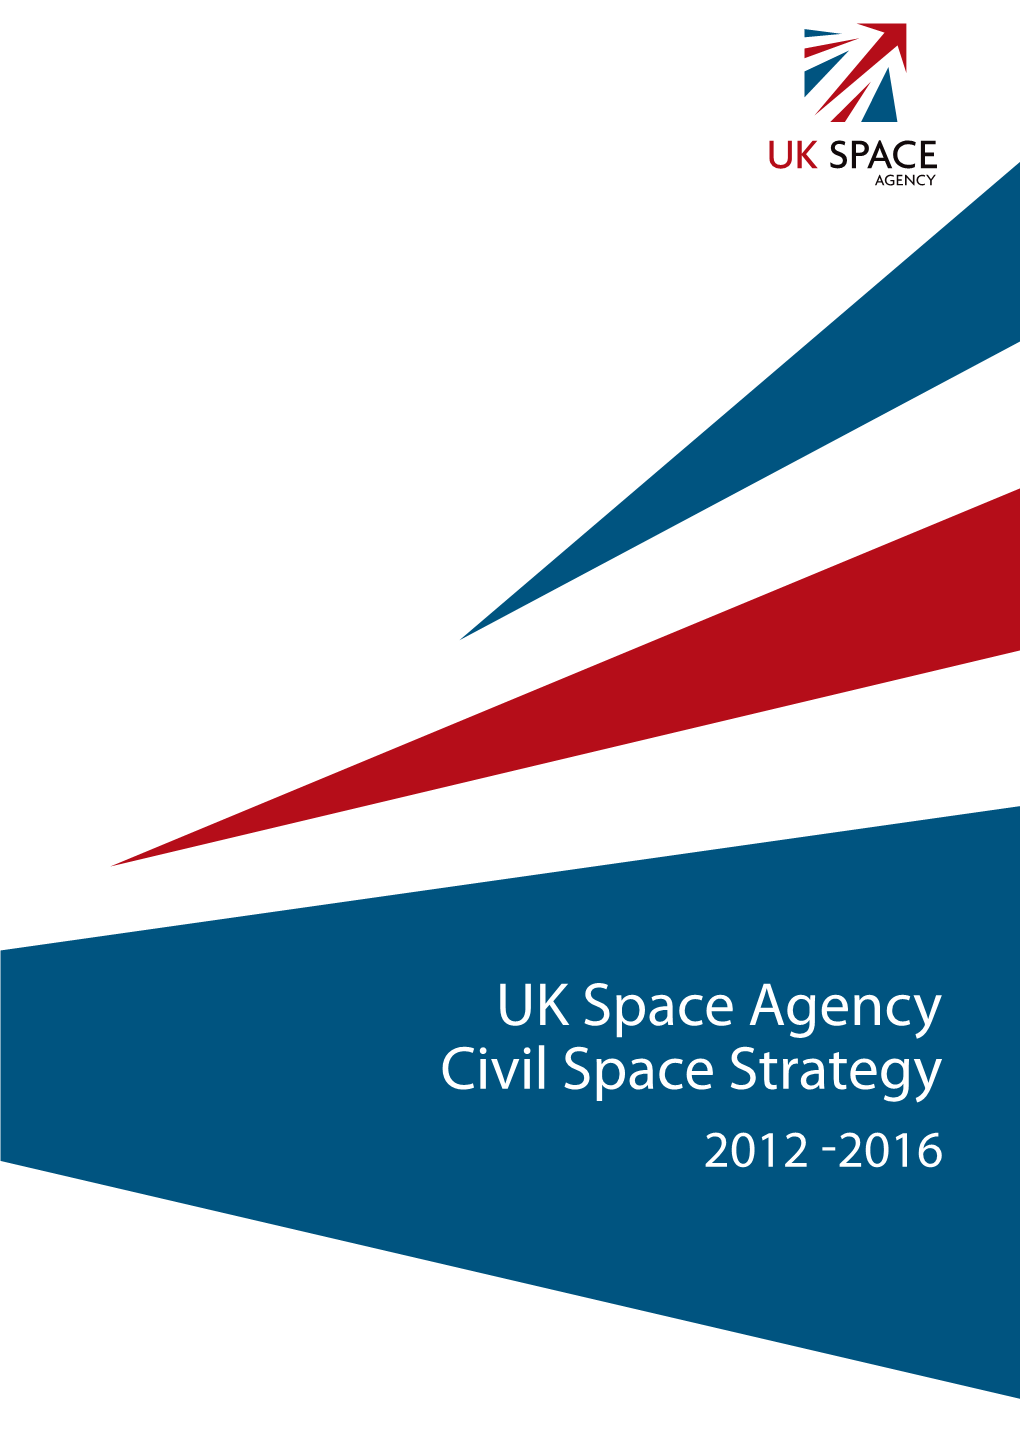 UK Space Agency Civil Space Strategy 2012-2016